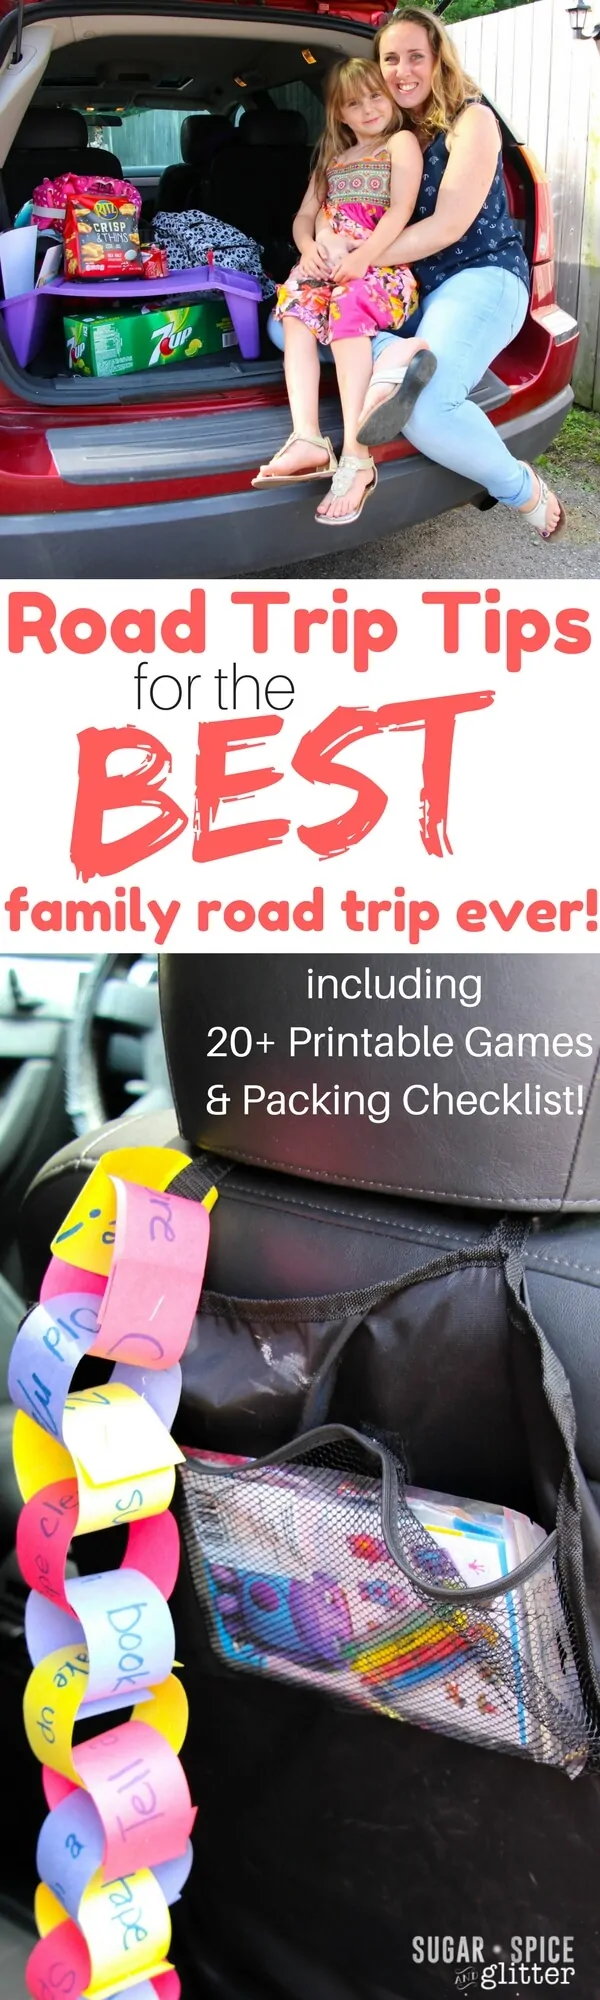 Awesome tips for the best family road trip ever, including activities and what to pack to keep everyone happy. Bonus printable packing checklist and 20+ Printable Road Trip Games for Kids.